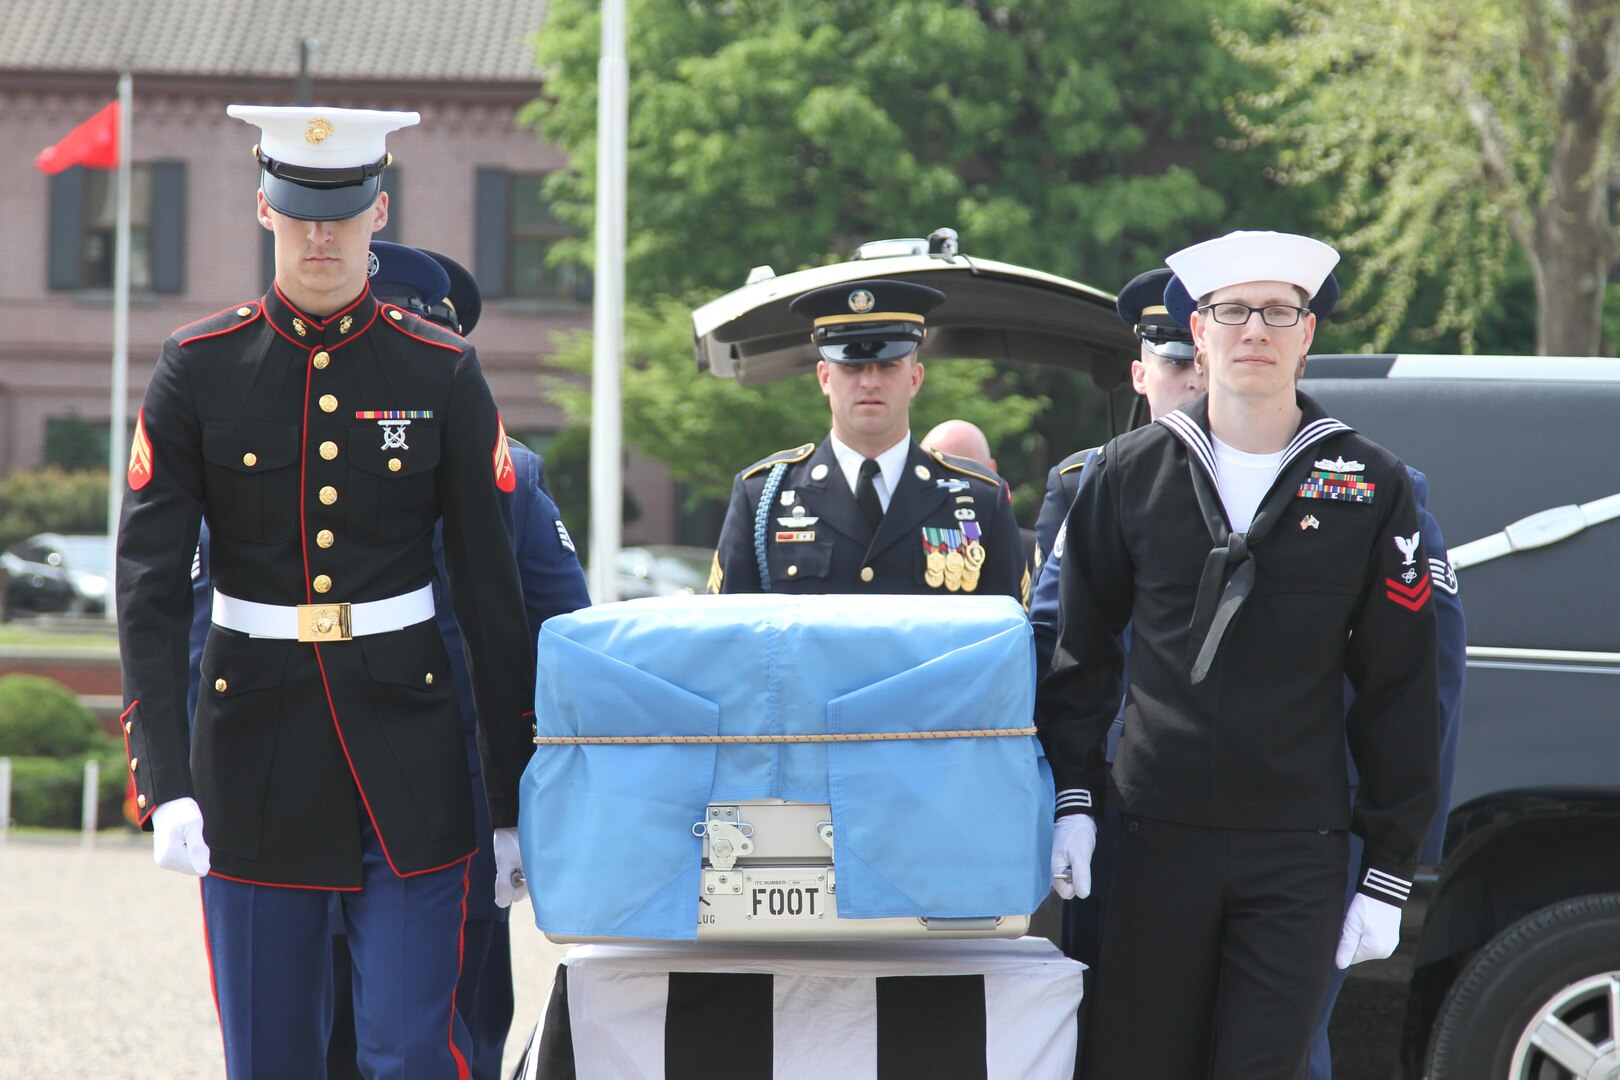 Pallbearers hold the caskets of the fallen Soldiers during a repatriation ceremony on the Knight Field, in Seoul, South Korea, April 28. The ceremony was conducted to return remains of United Nations Command and Korean Soldiers who died on the field of battle during the Korean War. 